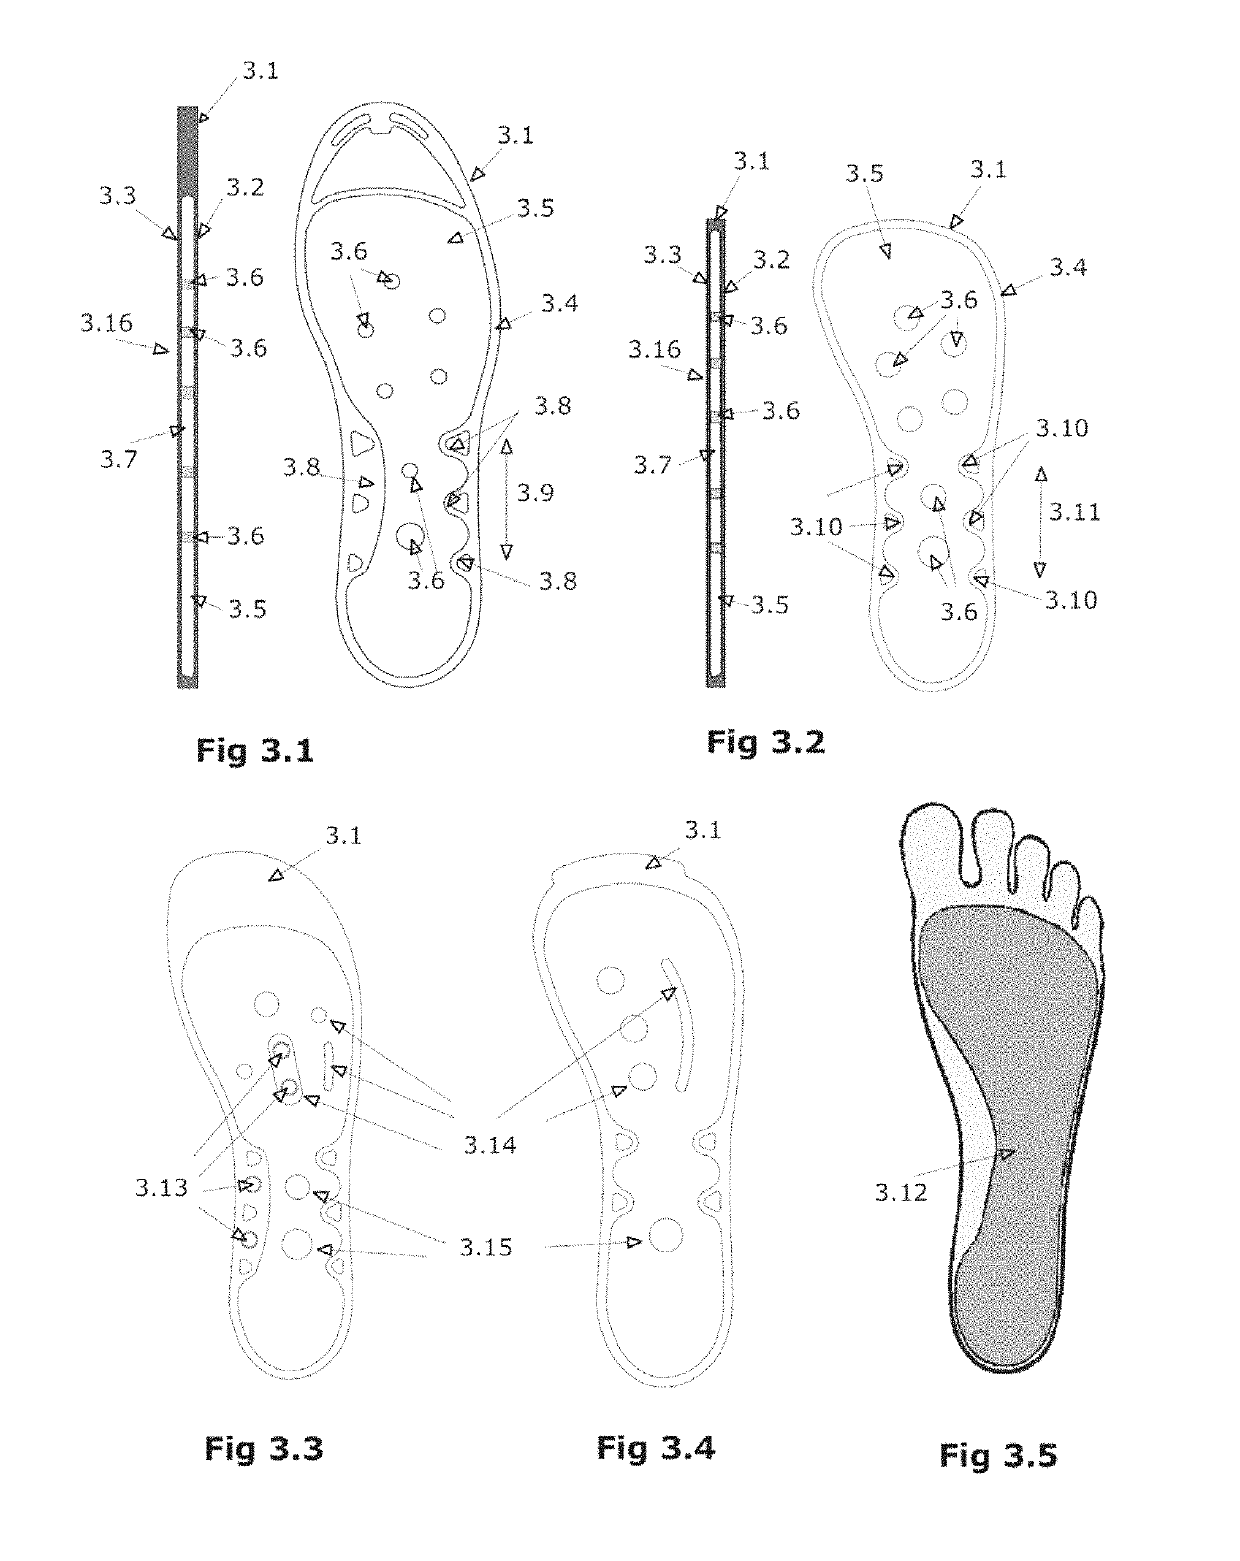 Balance-improving liquid-filled insole for use in therapeutics, rehabilitation, standing and walking work and sports